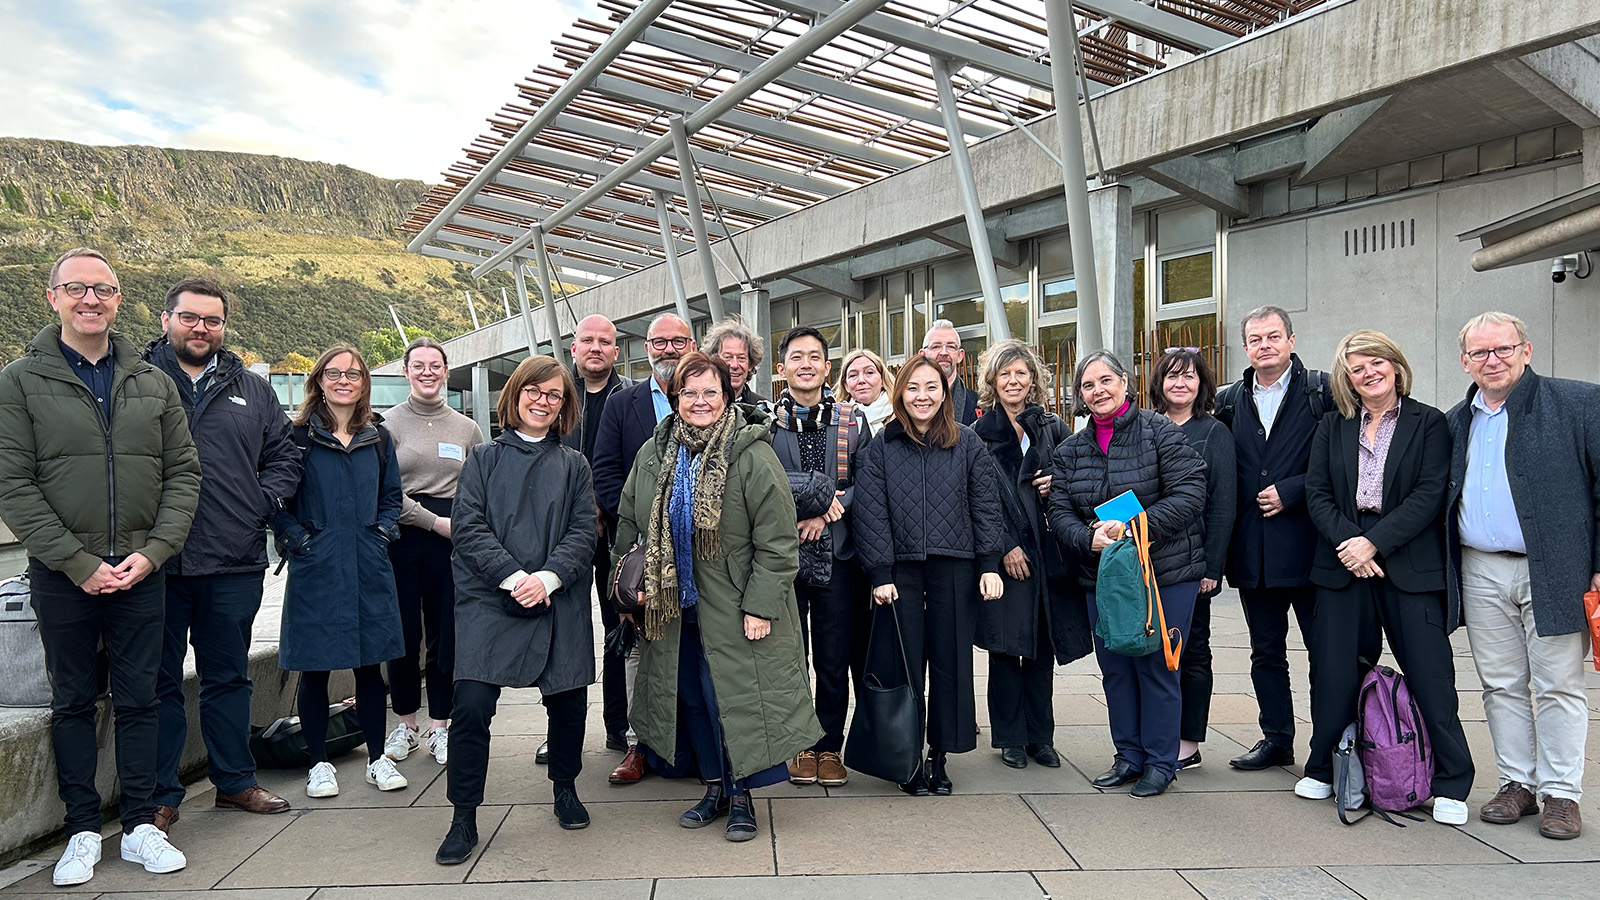 A big group of people stand together outside the front entrance to The Scottish Parliament building in Edinburgh